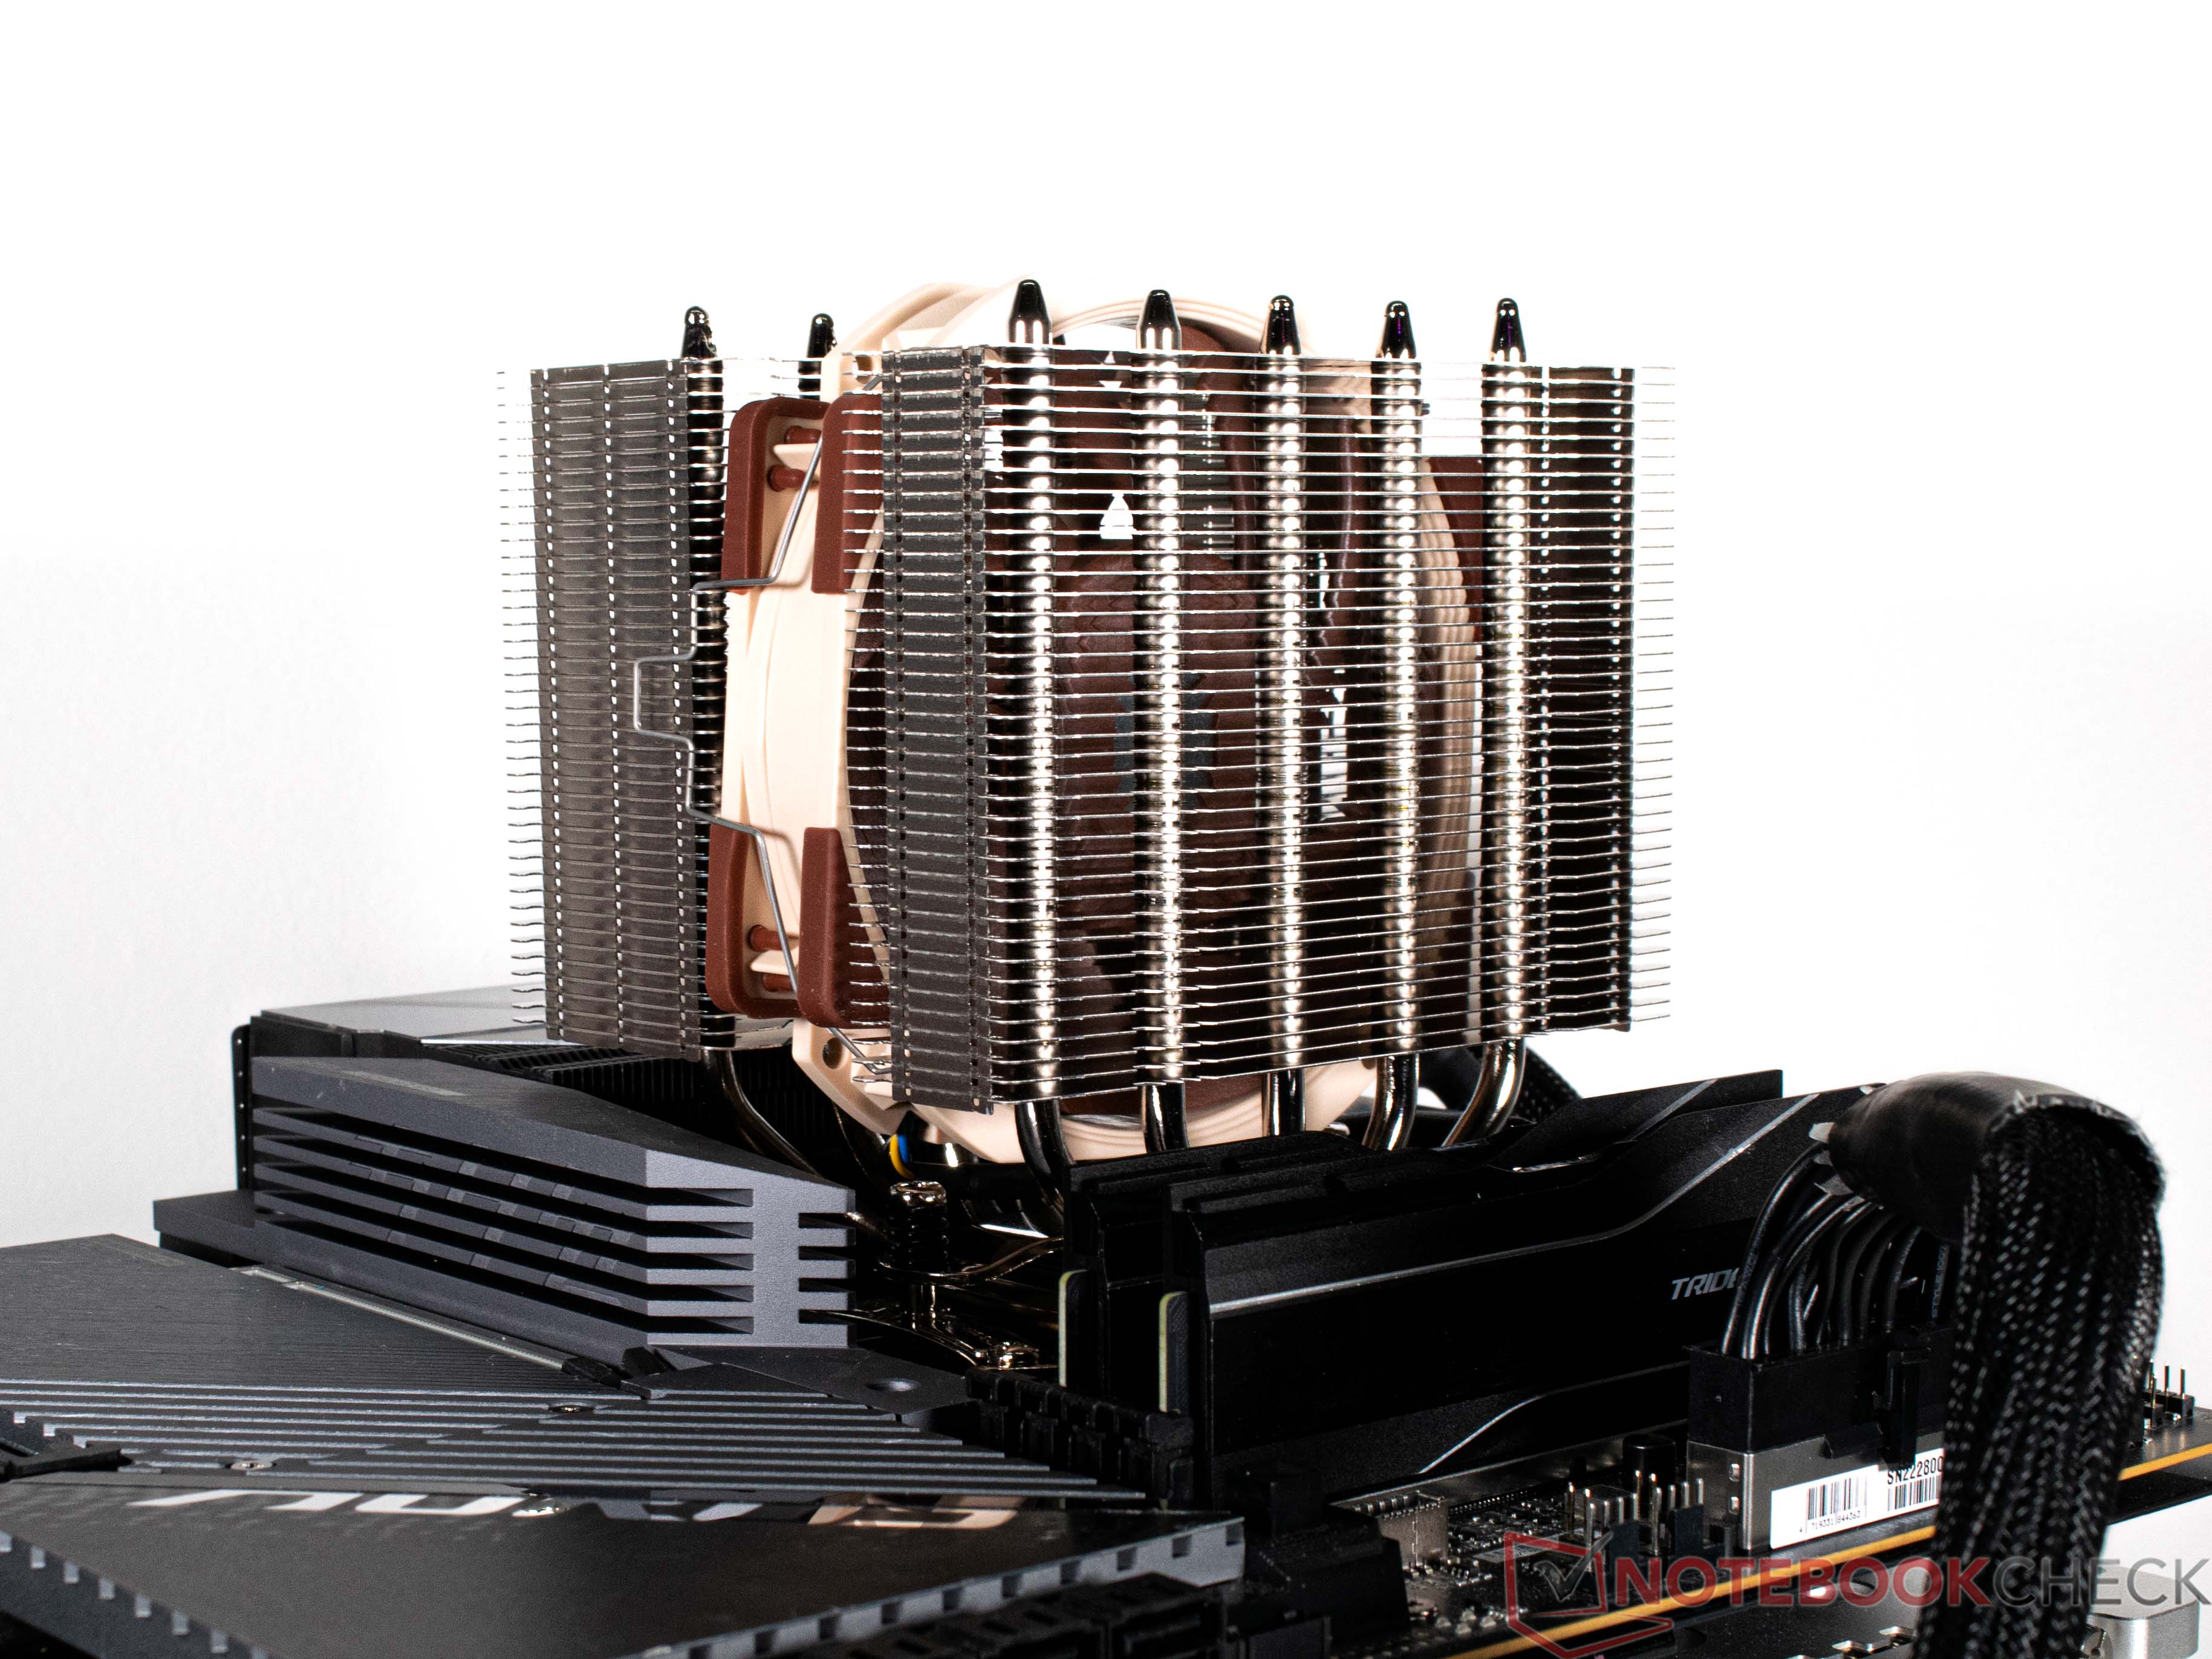 Noctua NH-D12L in review: Powerful premium CPU cooler for all common sockets